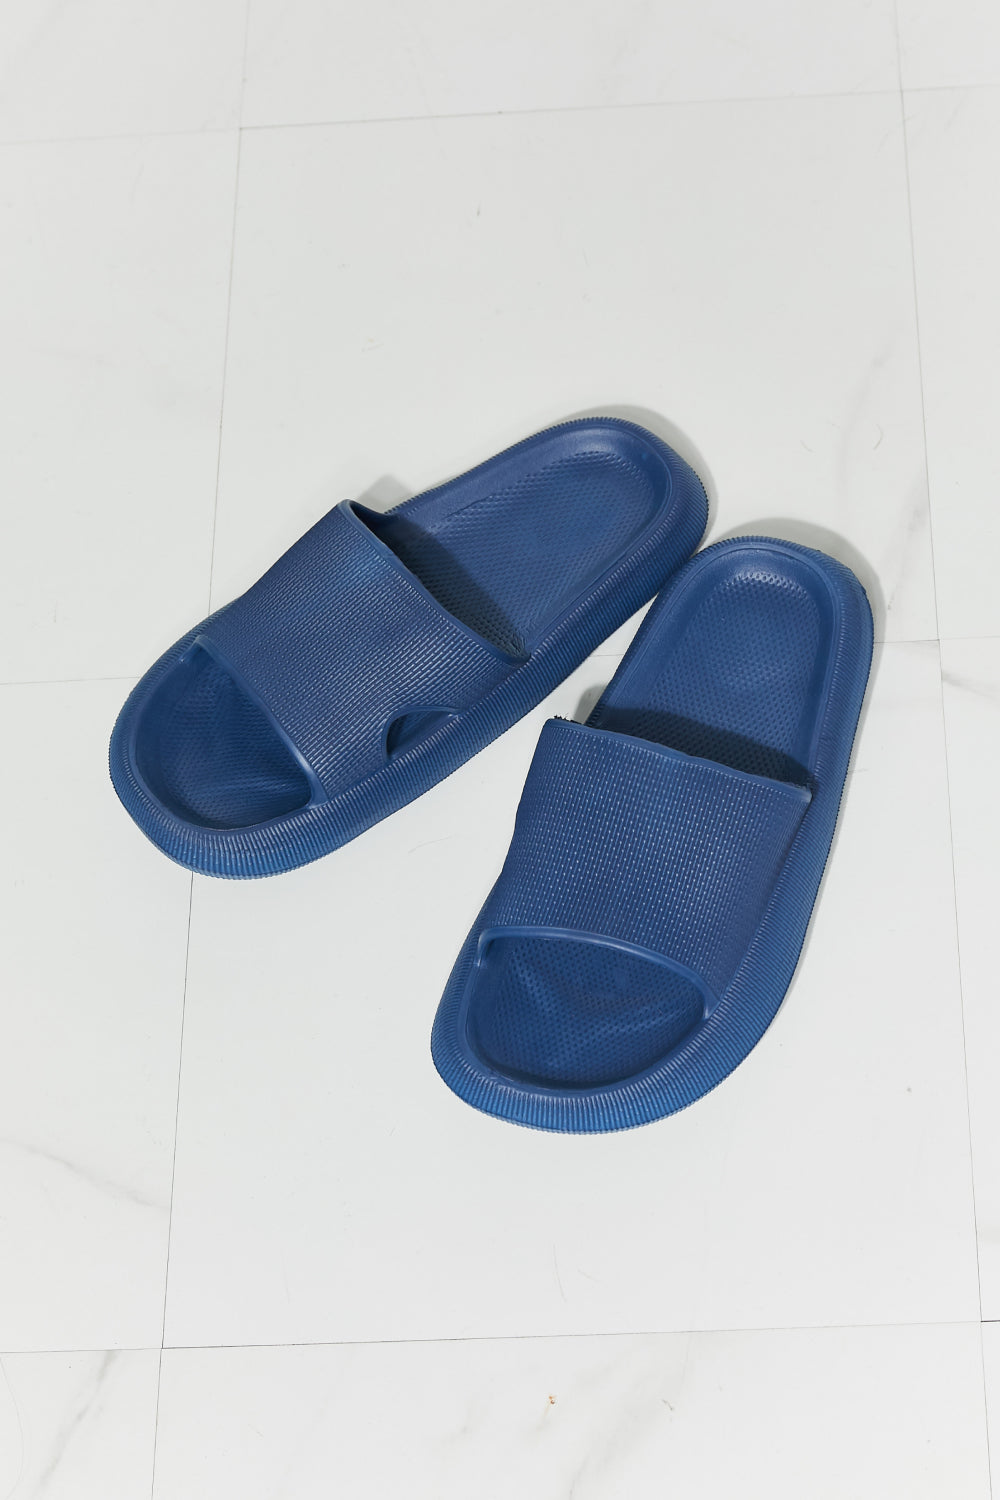 Light Gray MMShoes Arms Around Me Open Toe Slide in Navy Accessories